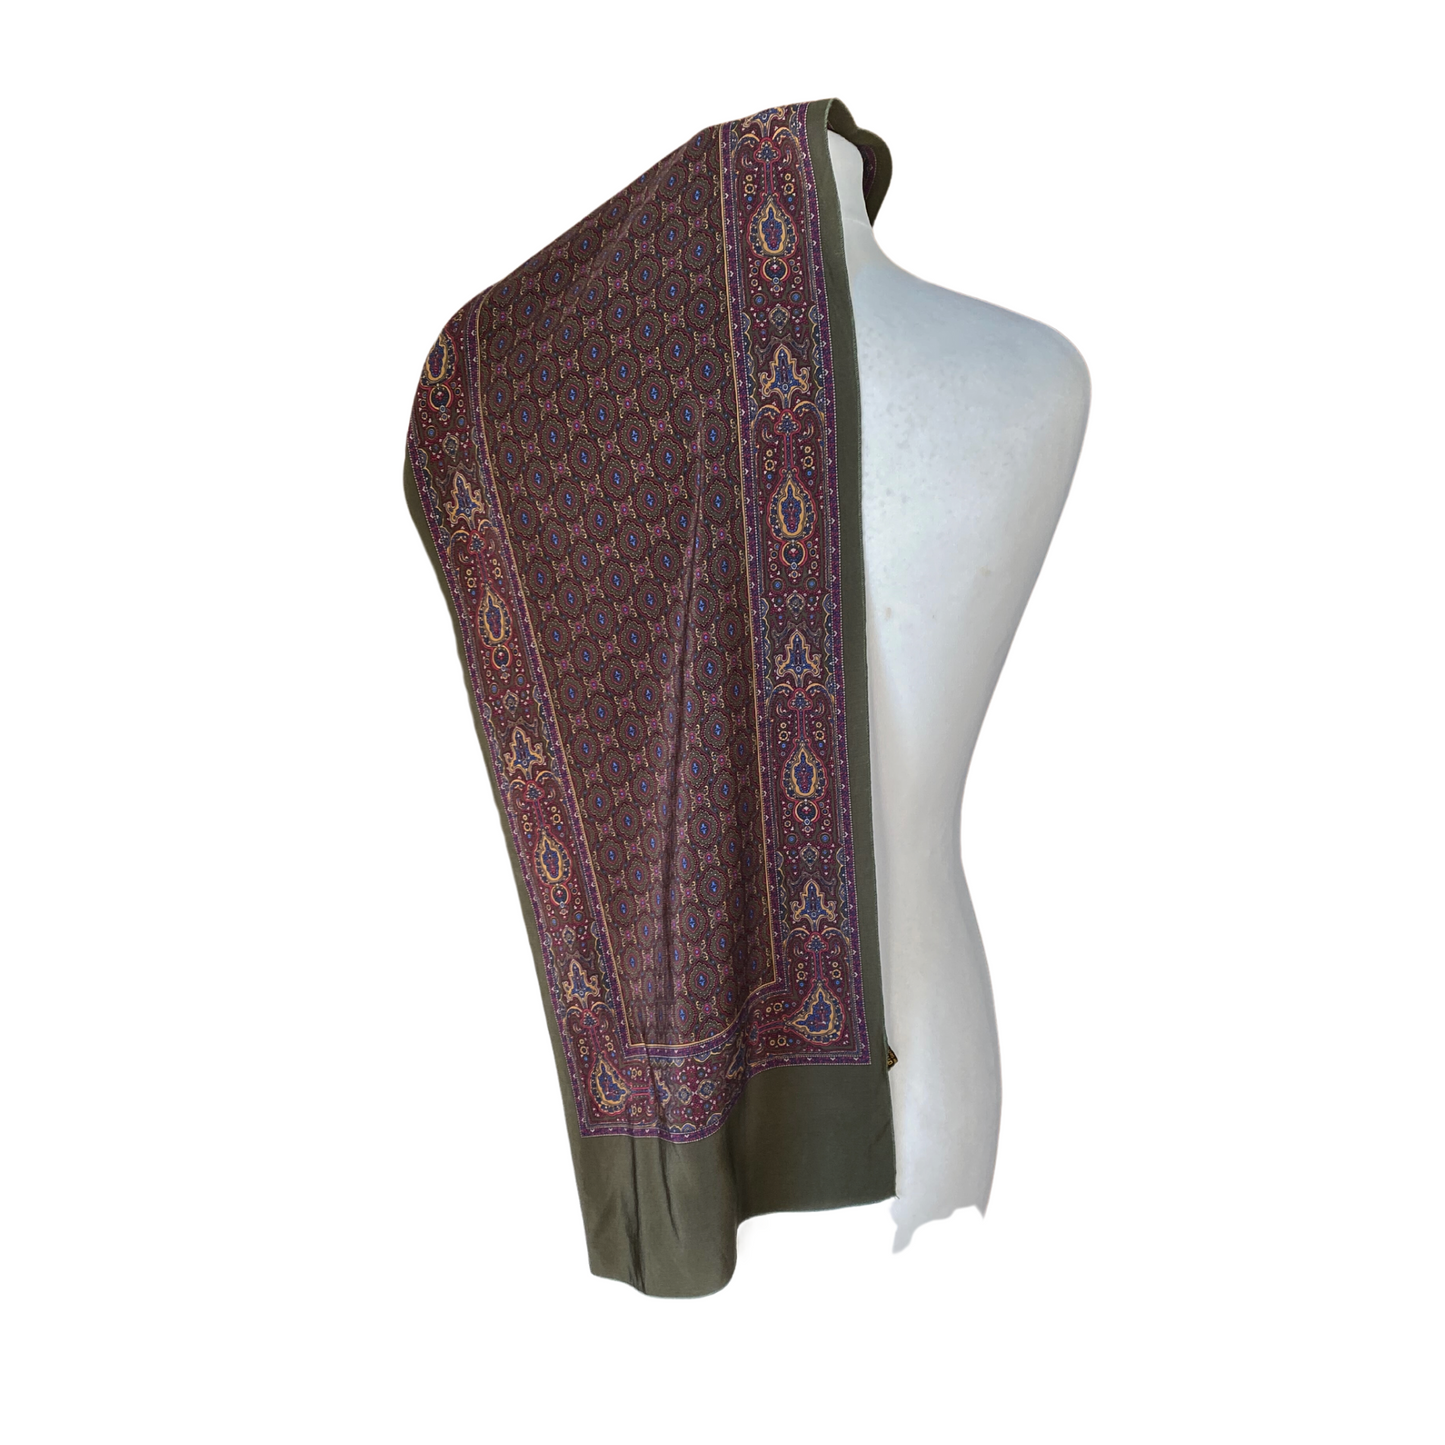 Vintage Richel silk scarf - Luxurious and comfortable to wear.